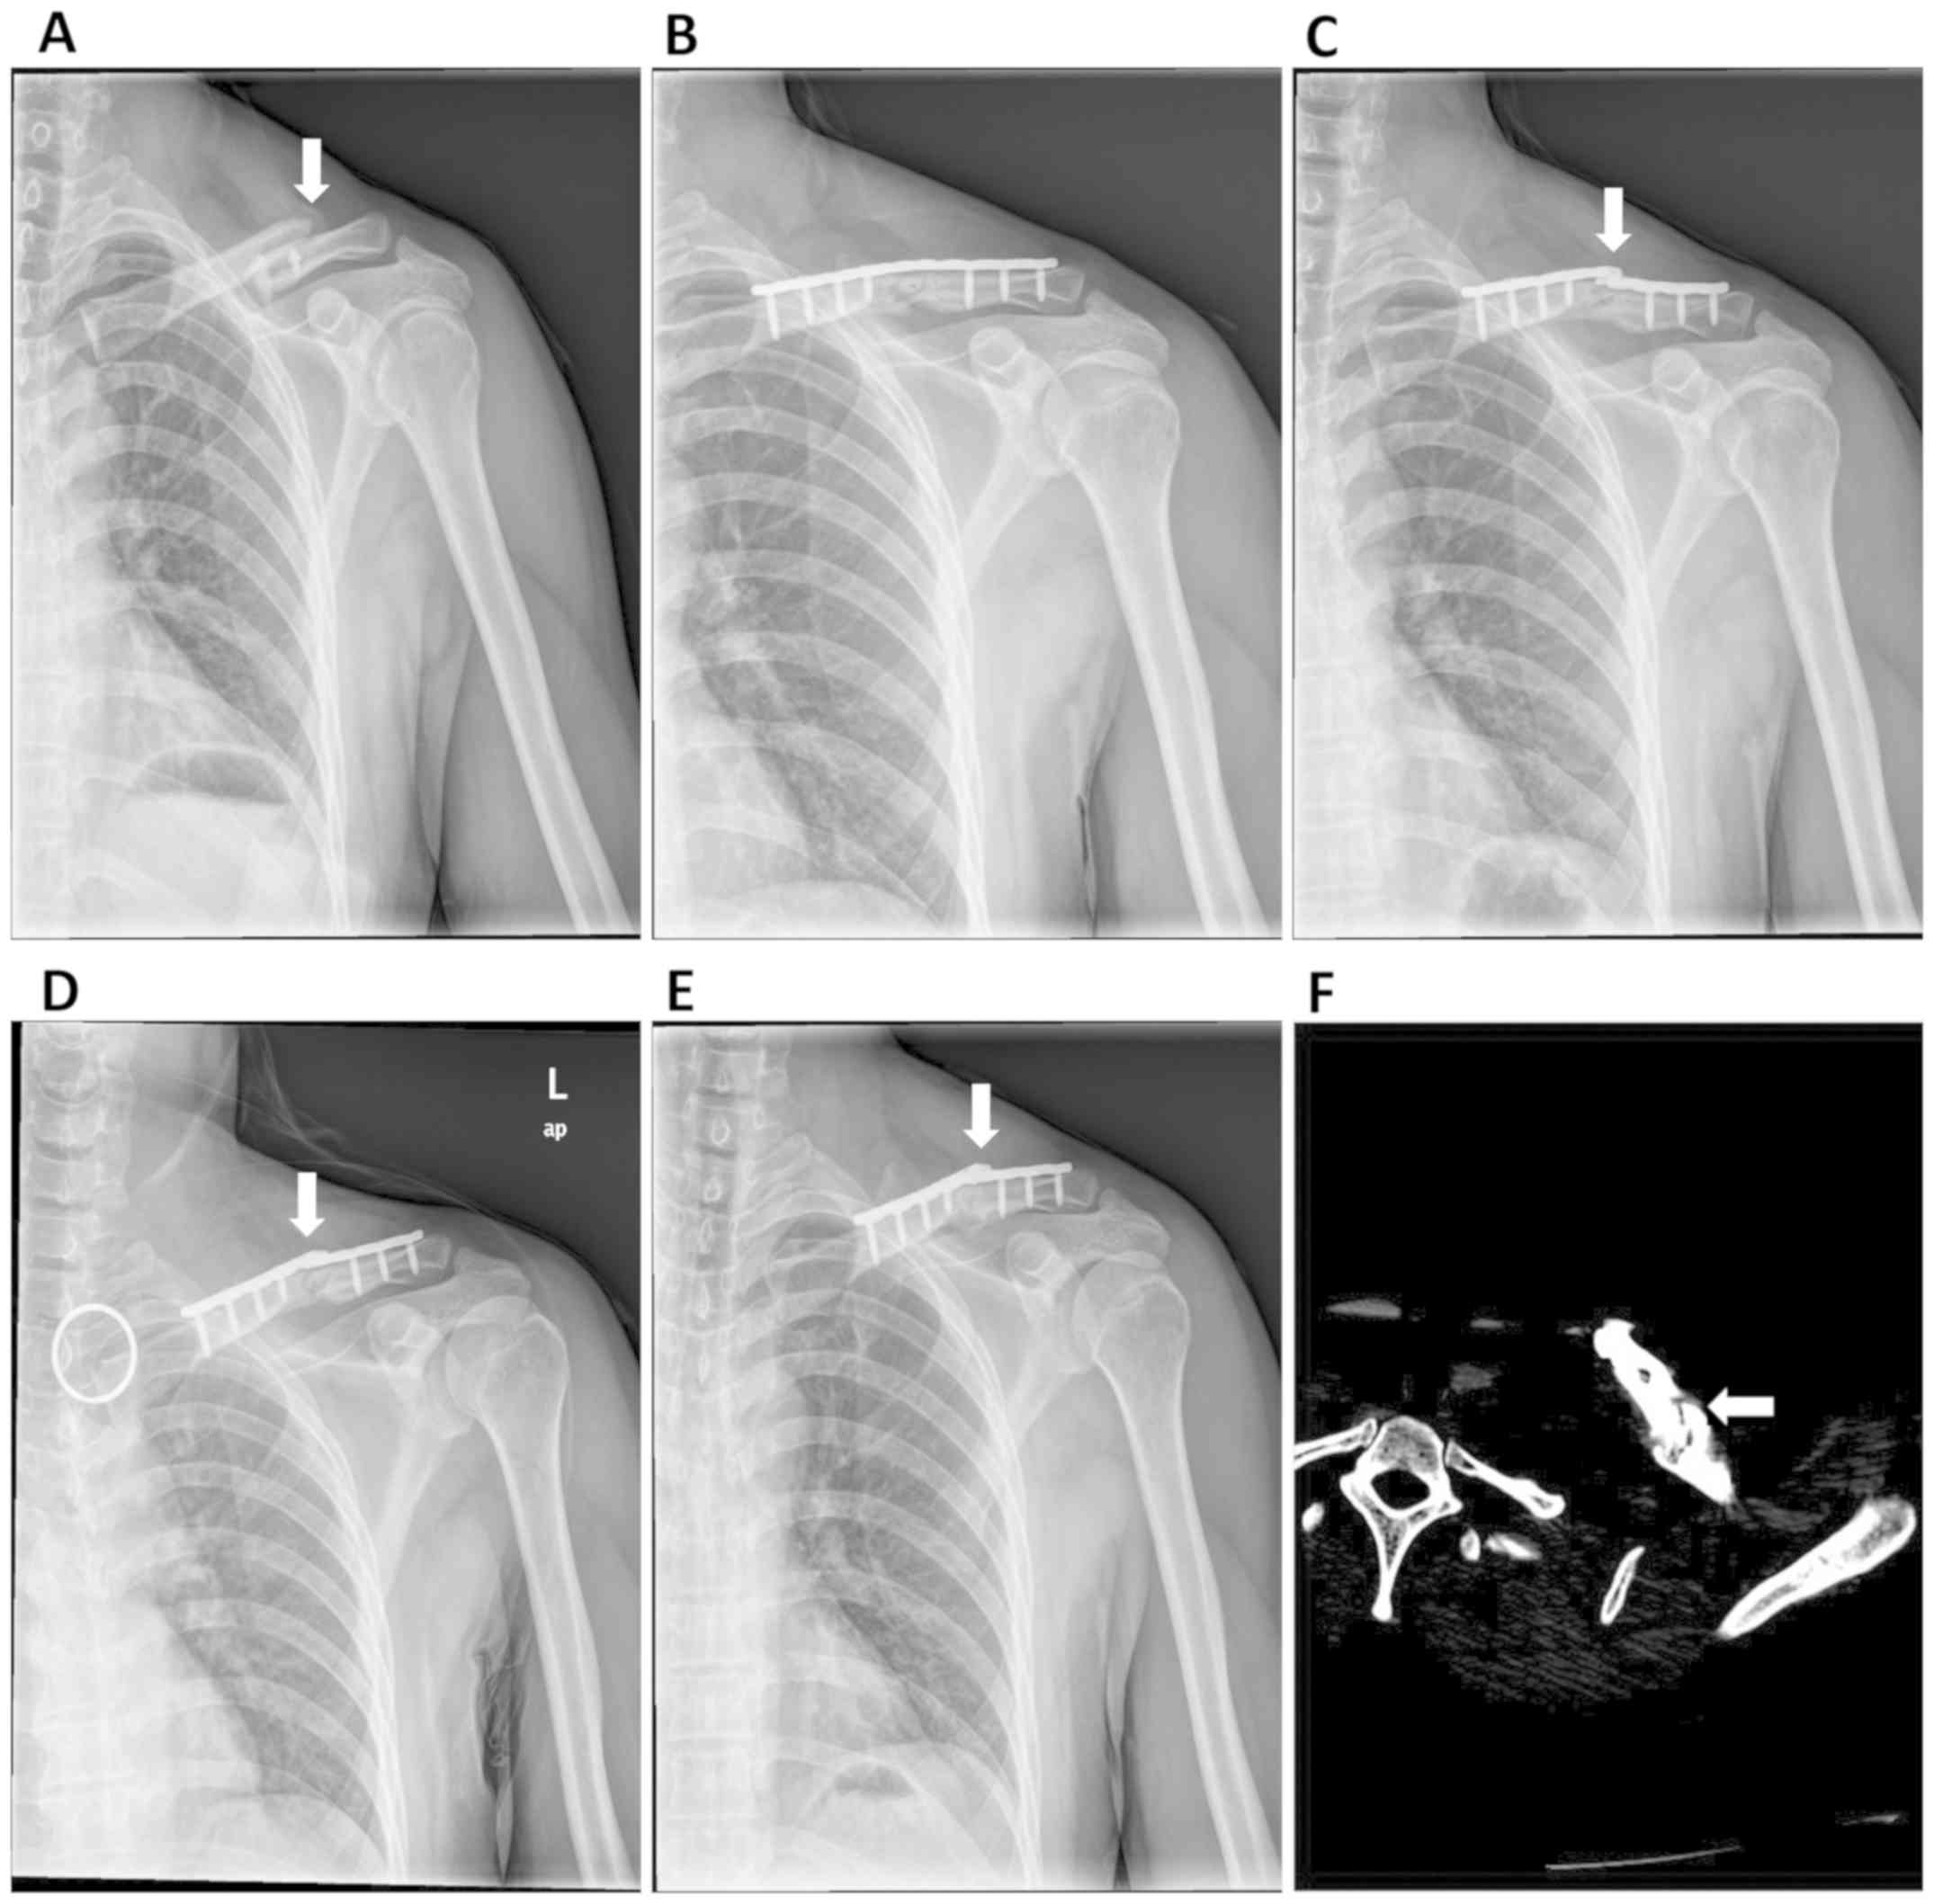 Clavicle Nonunion And Plate Breakage After Locking Compression Plate